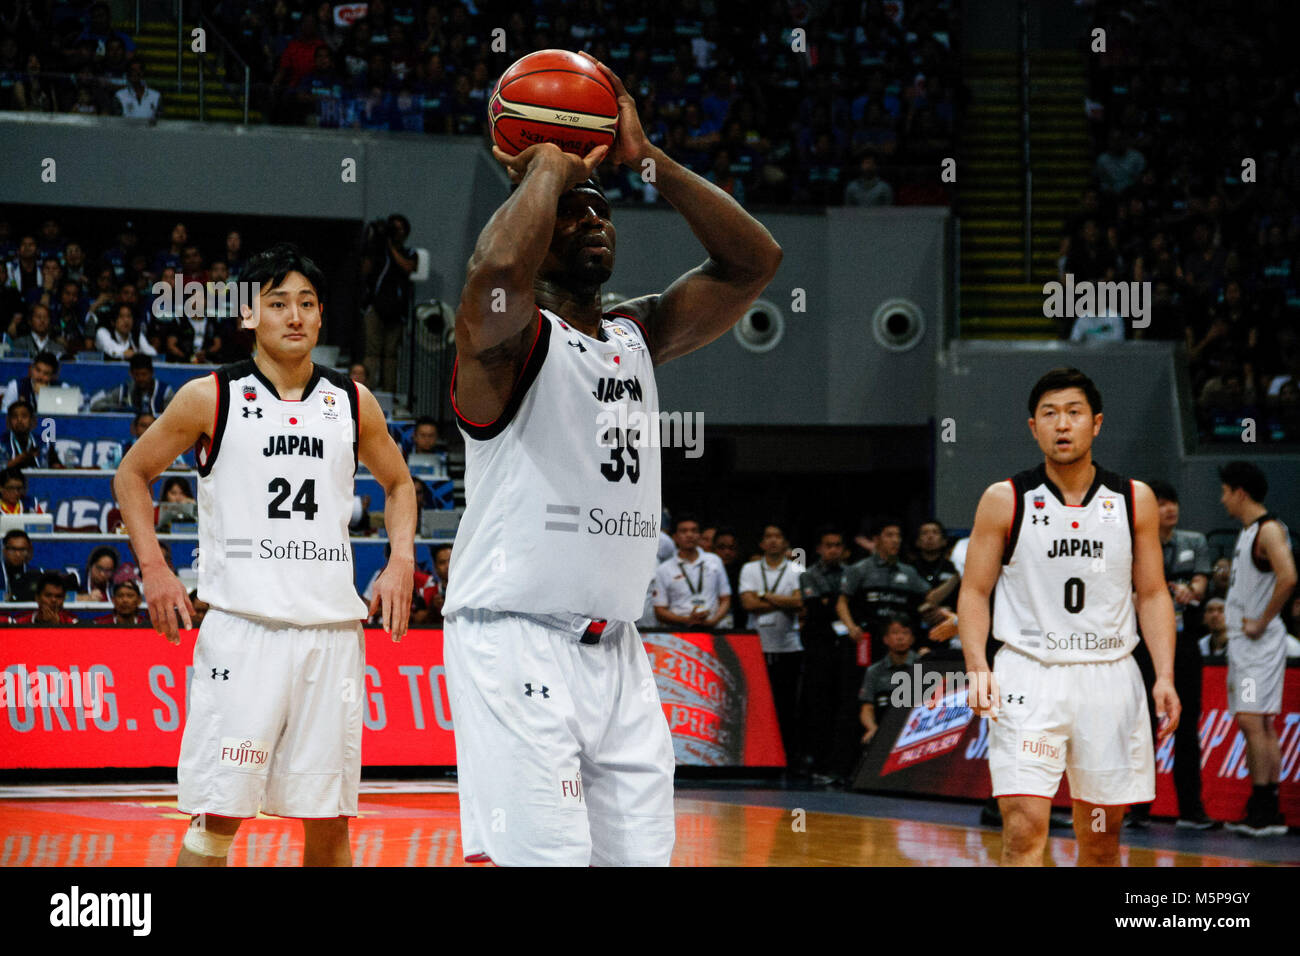 Philippines. 25th Feb, 2018. Ira Brown (35) of team Japan lines up a shot during the qualifying game at the MOA Arena. The Philippine and Japanese basketball team met at the hardcourt of the Mall of Asia Arena in Pasay City, for the FIBA World Cup 2019 Asian Qualifiers. The Philippines won over Japan, 89-84. Credit: J Gerard Seguia/ZUMA Wire/Alamy Live News Stock Photo